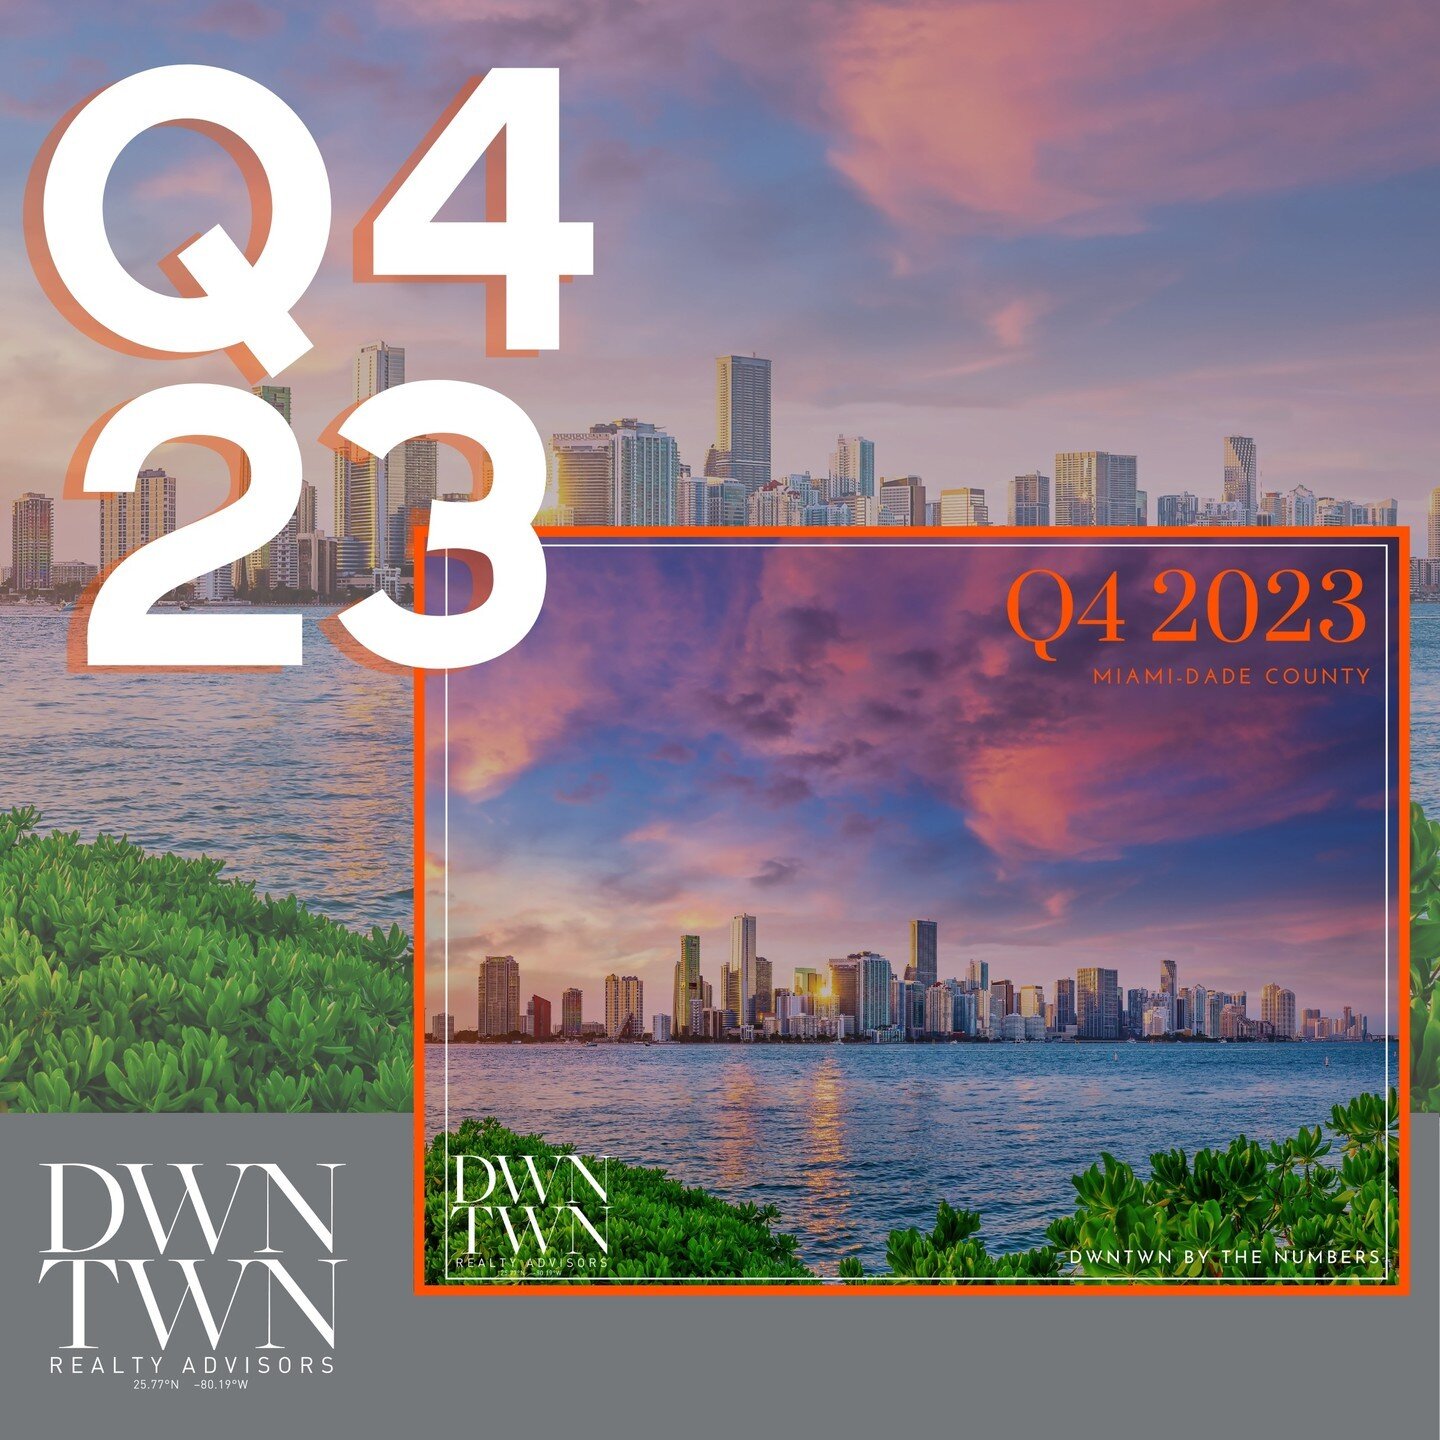 MIAMI-DADE COUNTY Q4 2023 MARKET REPORT | DWNTWN By The Numbers

Head to the link in bio to download your copy of our Q4 203 report to learn more about:

&bull; Quarterly Transaction Volume
&bull; Number of Transactions
&bull; Most Active Submarkets
